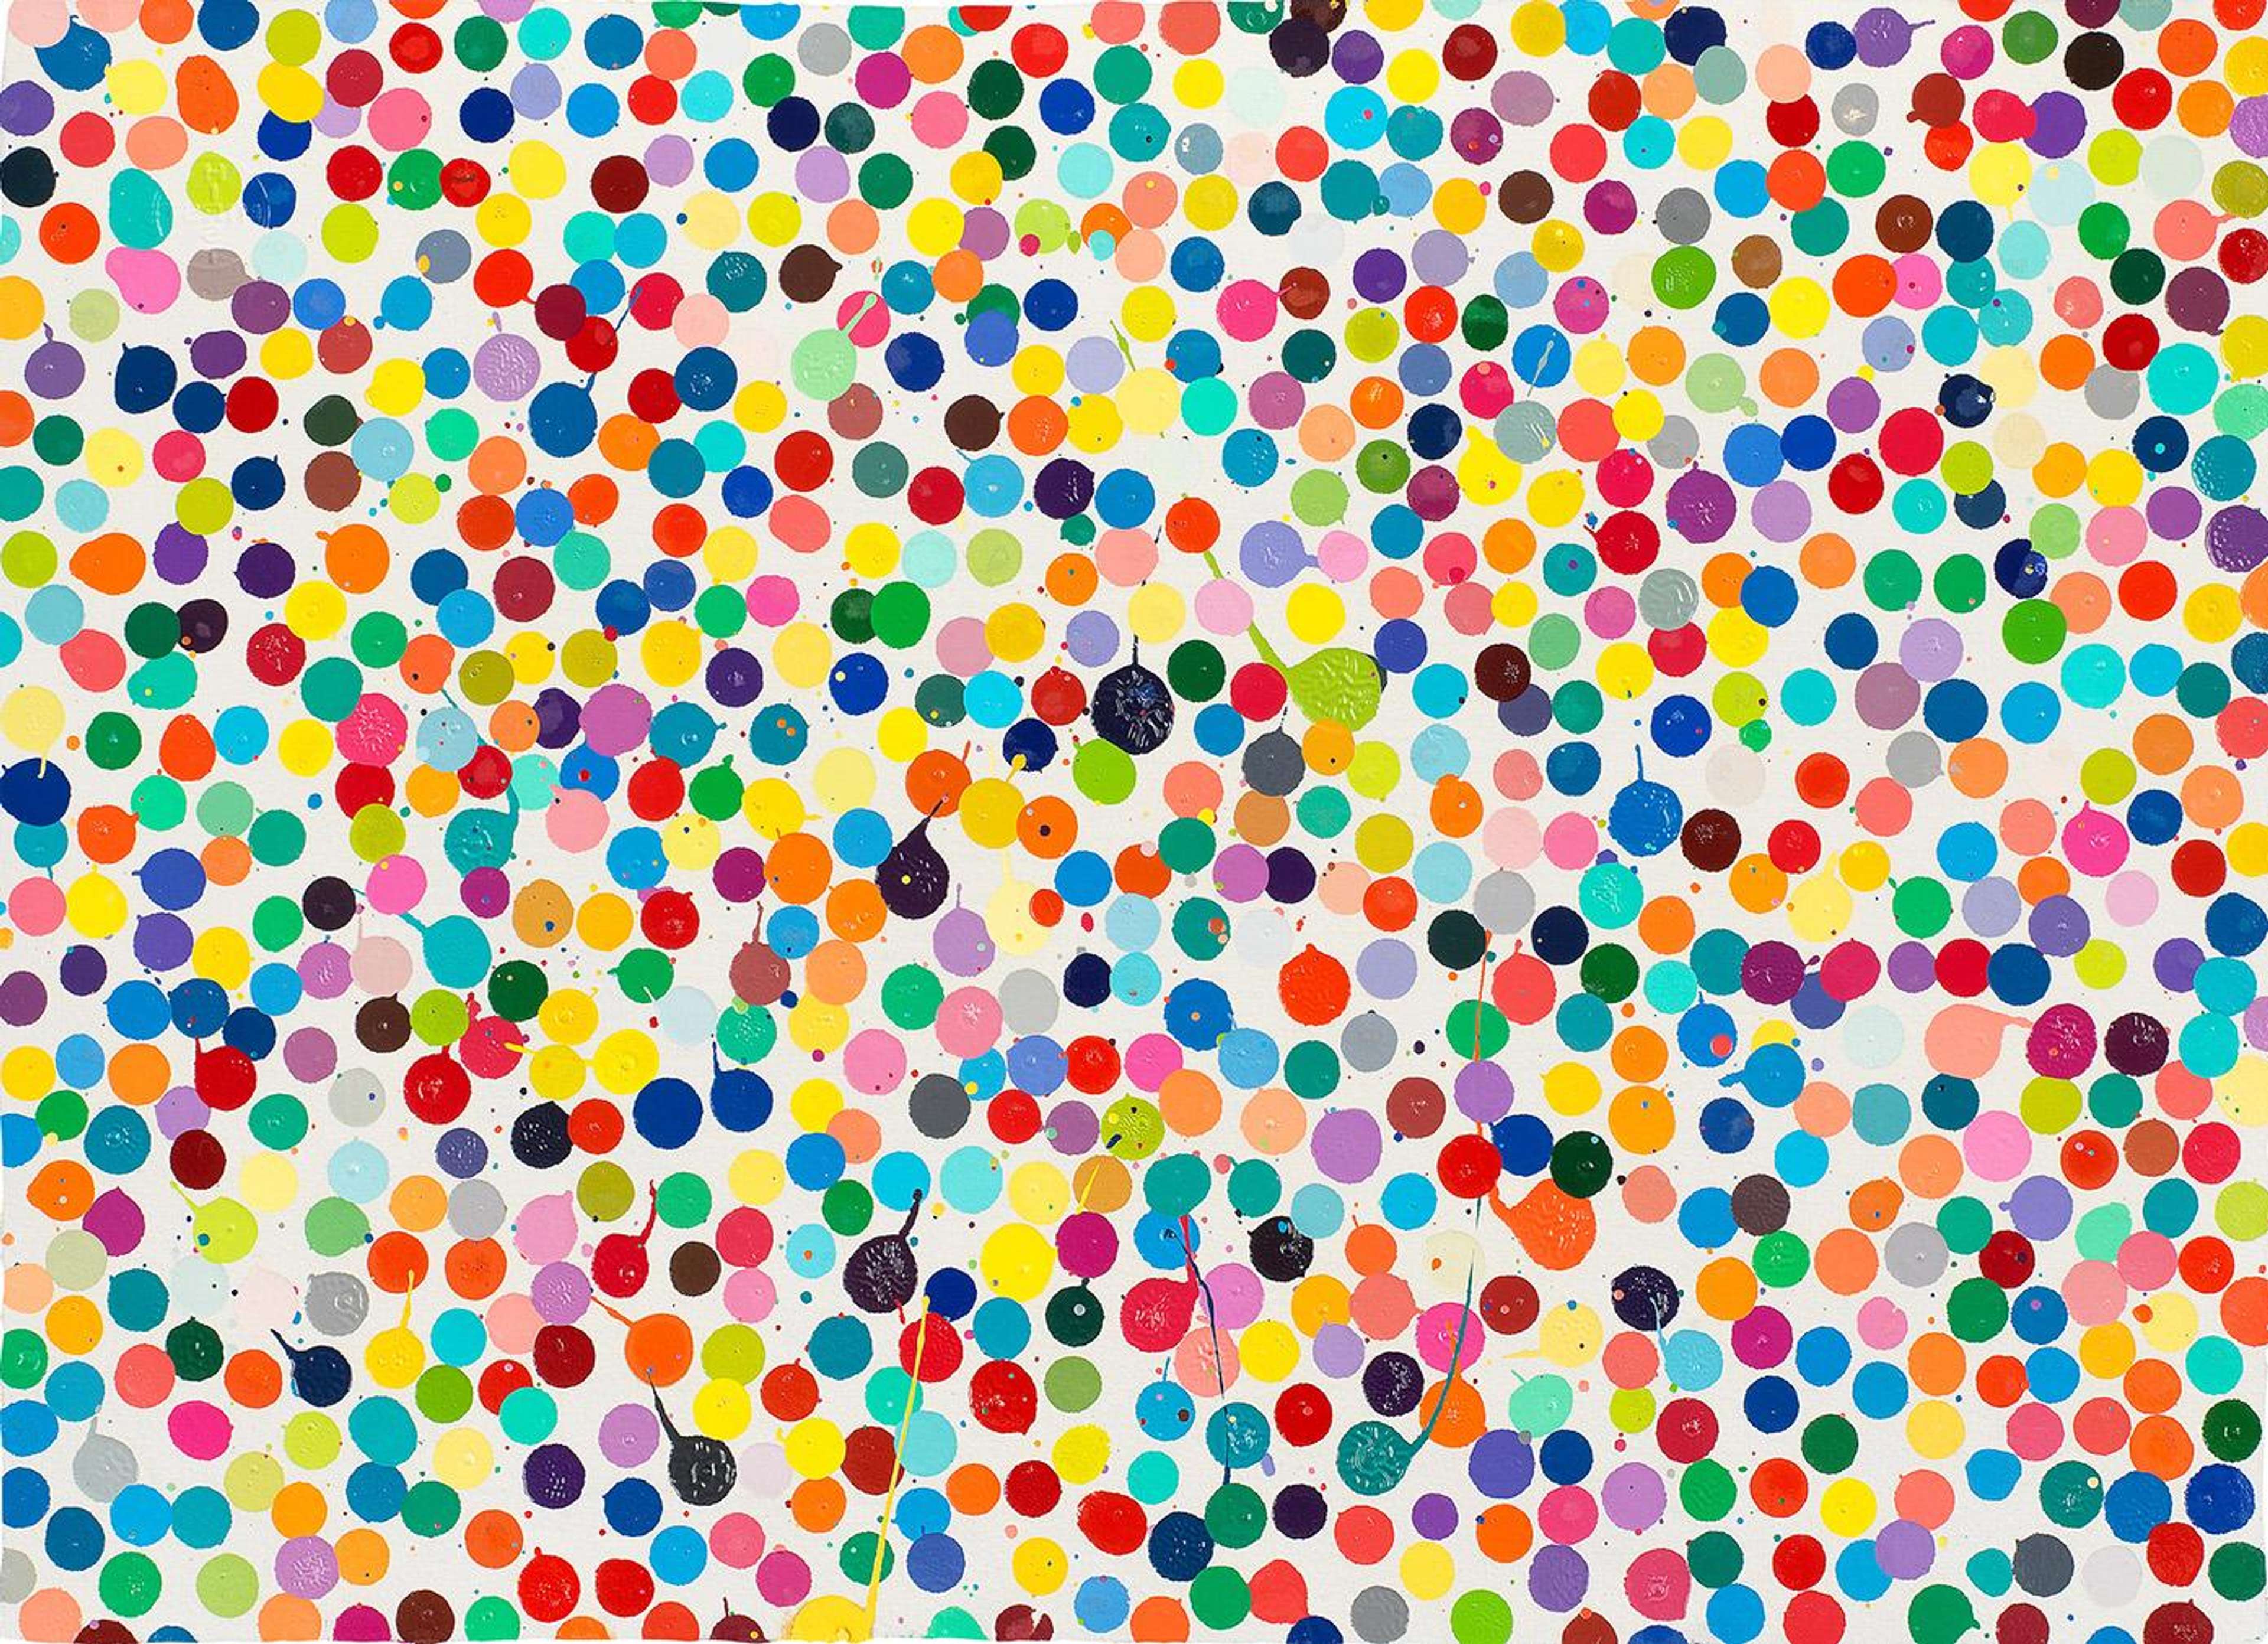 A mixed media artwork showing lots of multicoloured dots against a white paper background.